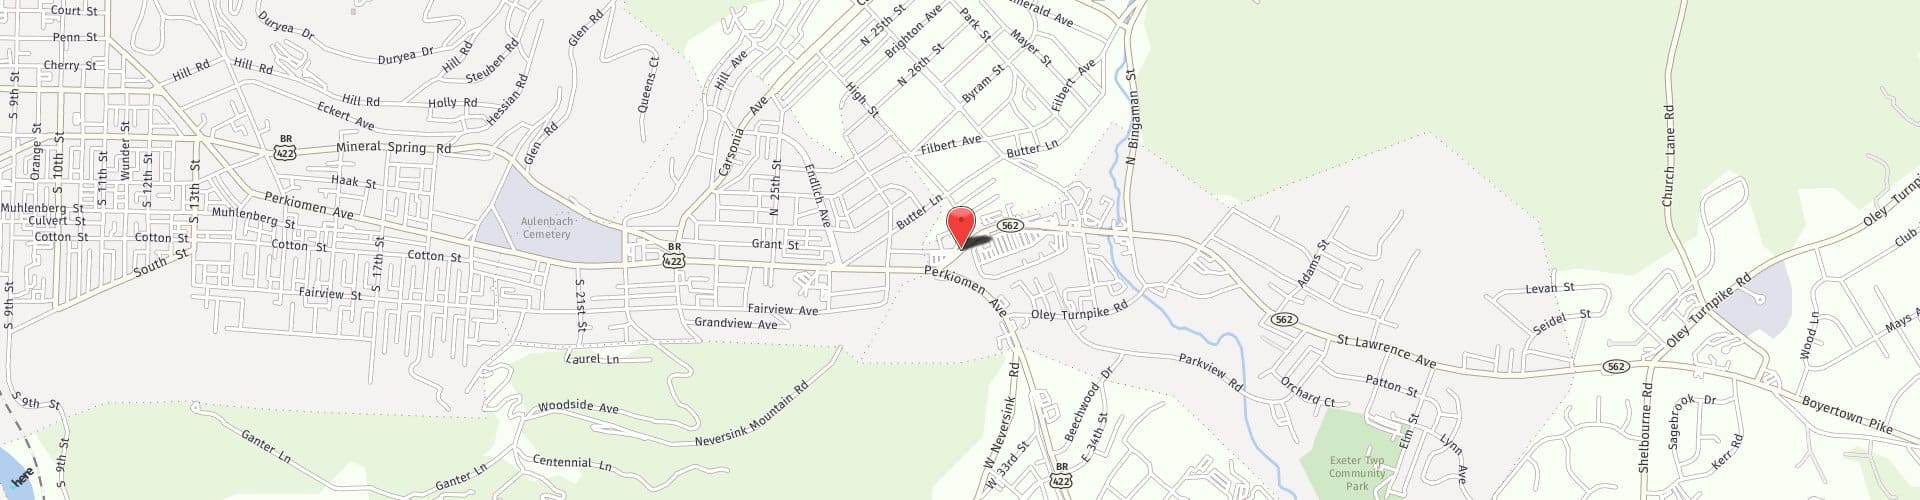 Location Map: 2901 Saint Lawrence Ave Reading, PA 19606